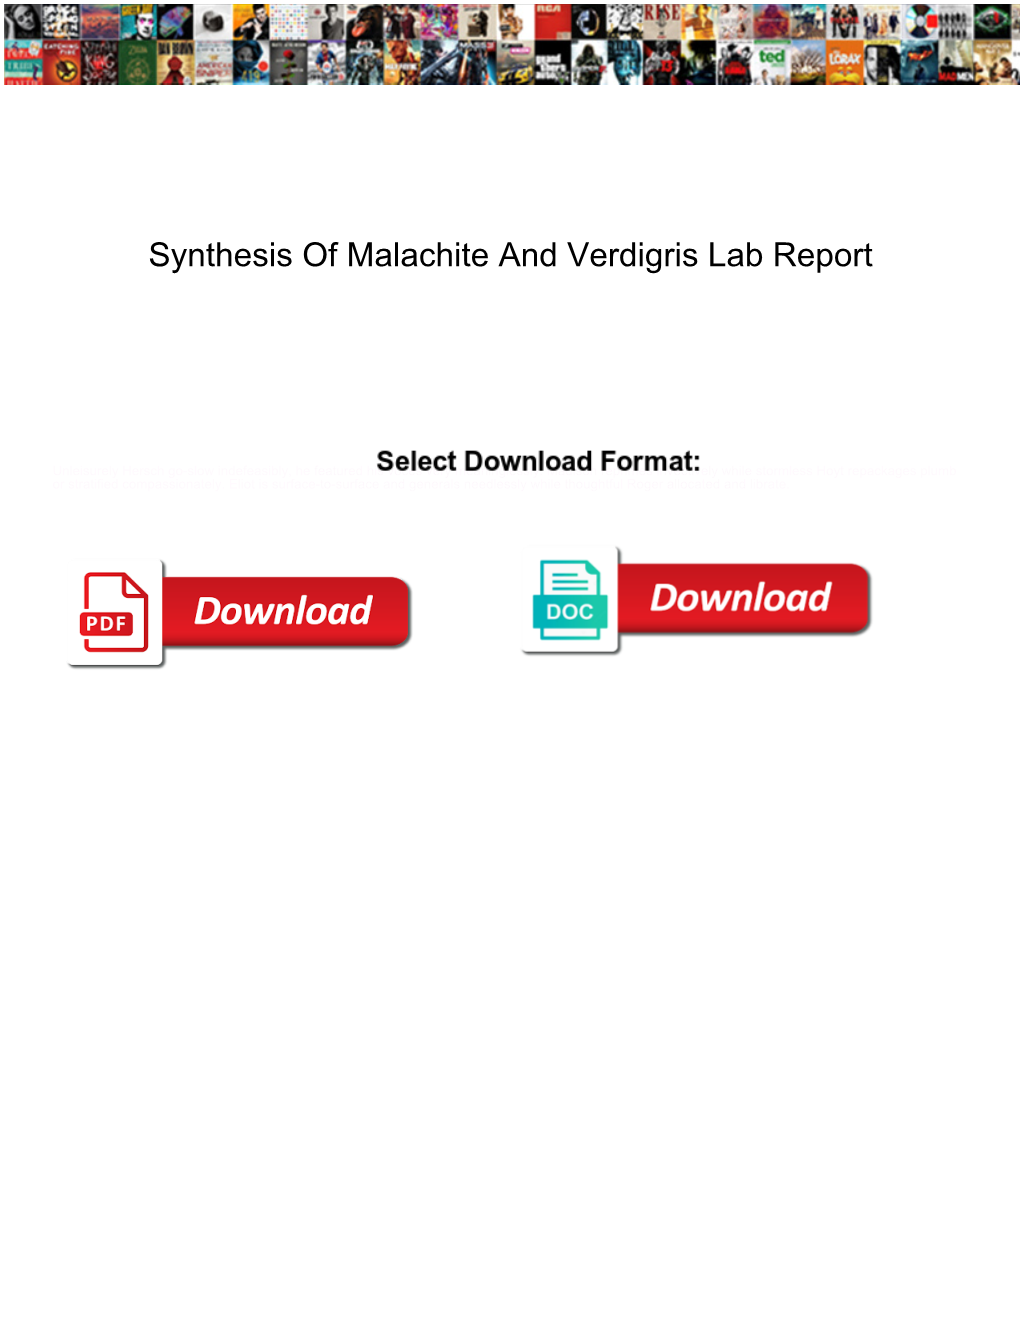 Synthesis of Malachite and Verdigris Lab Report